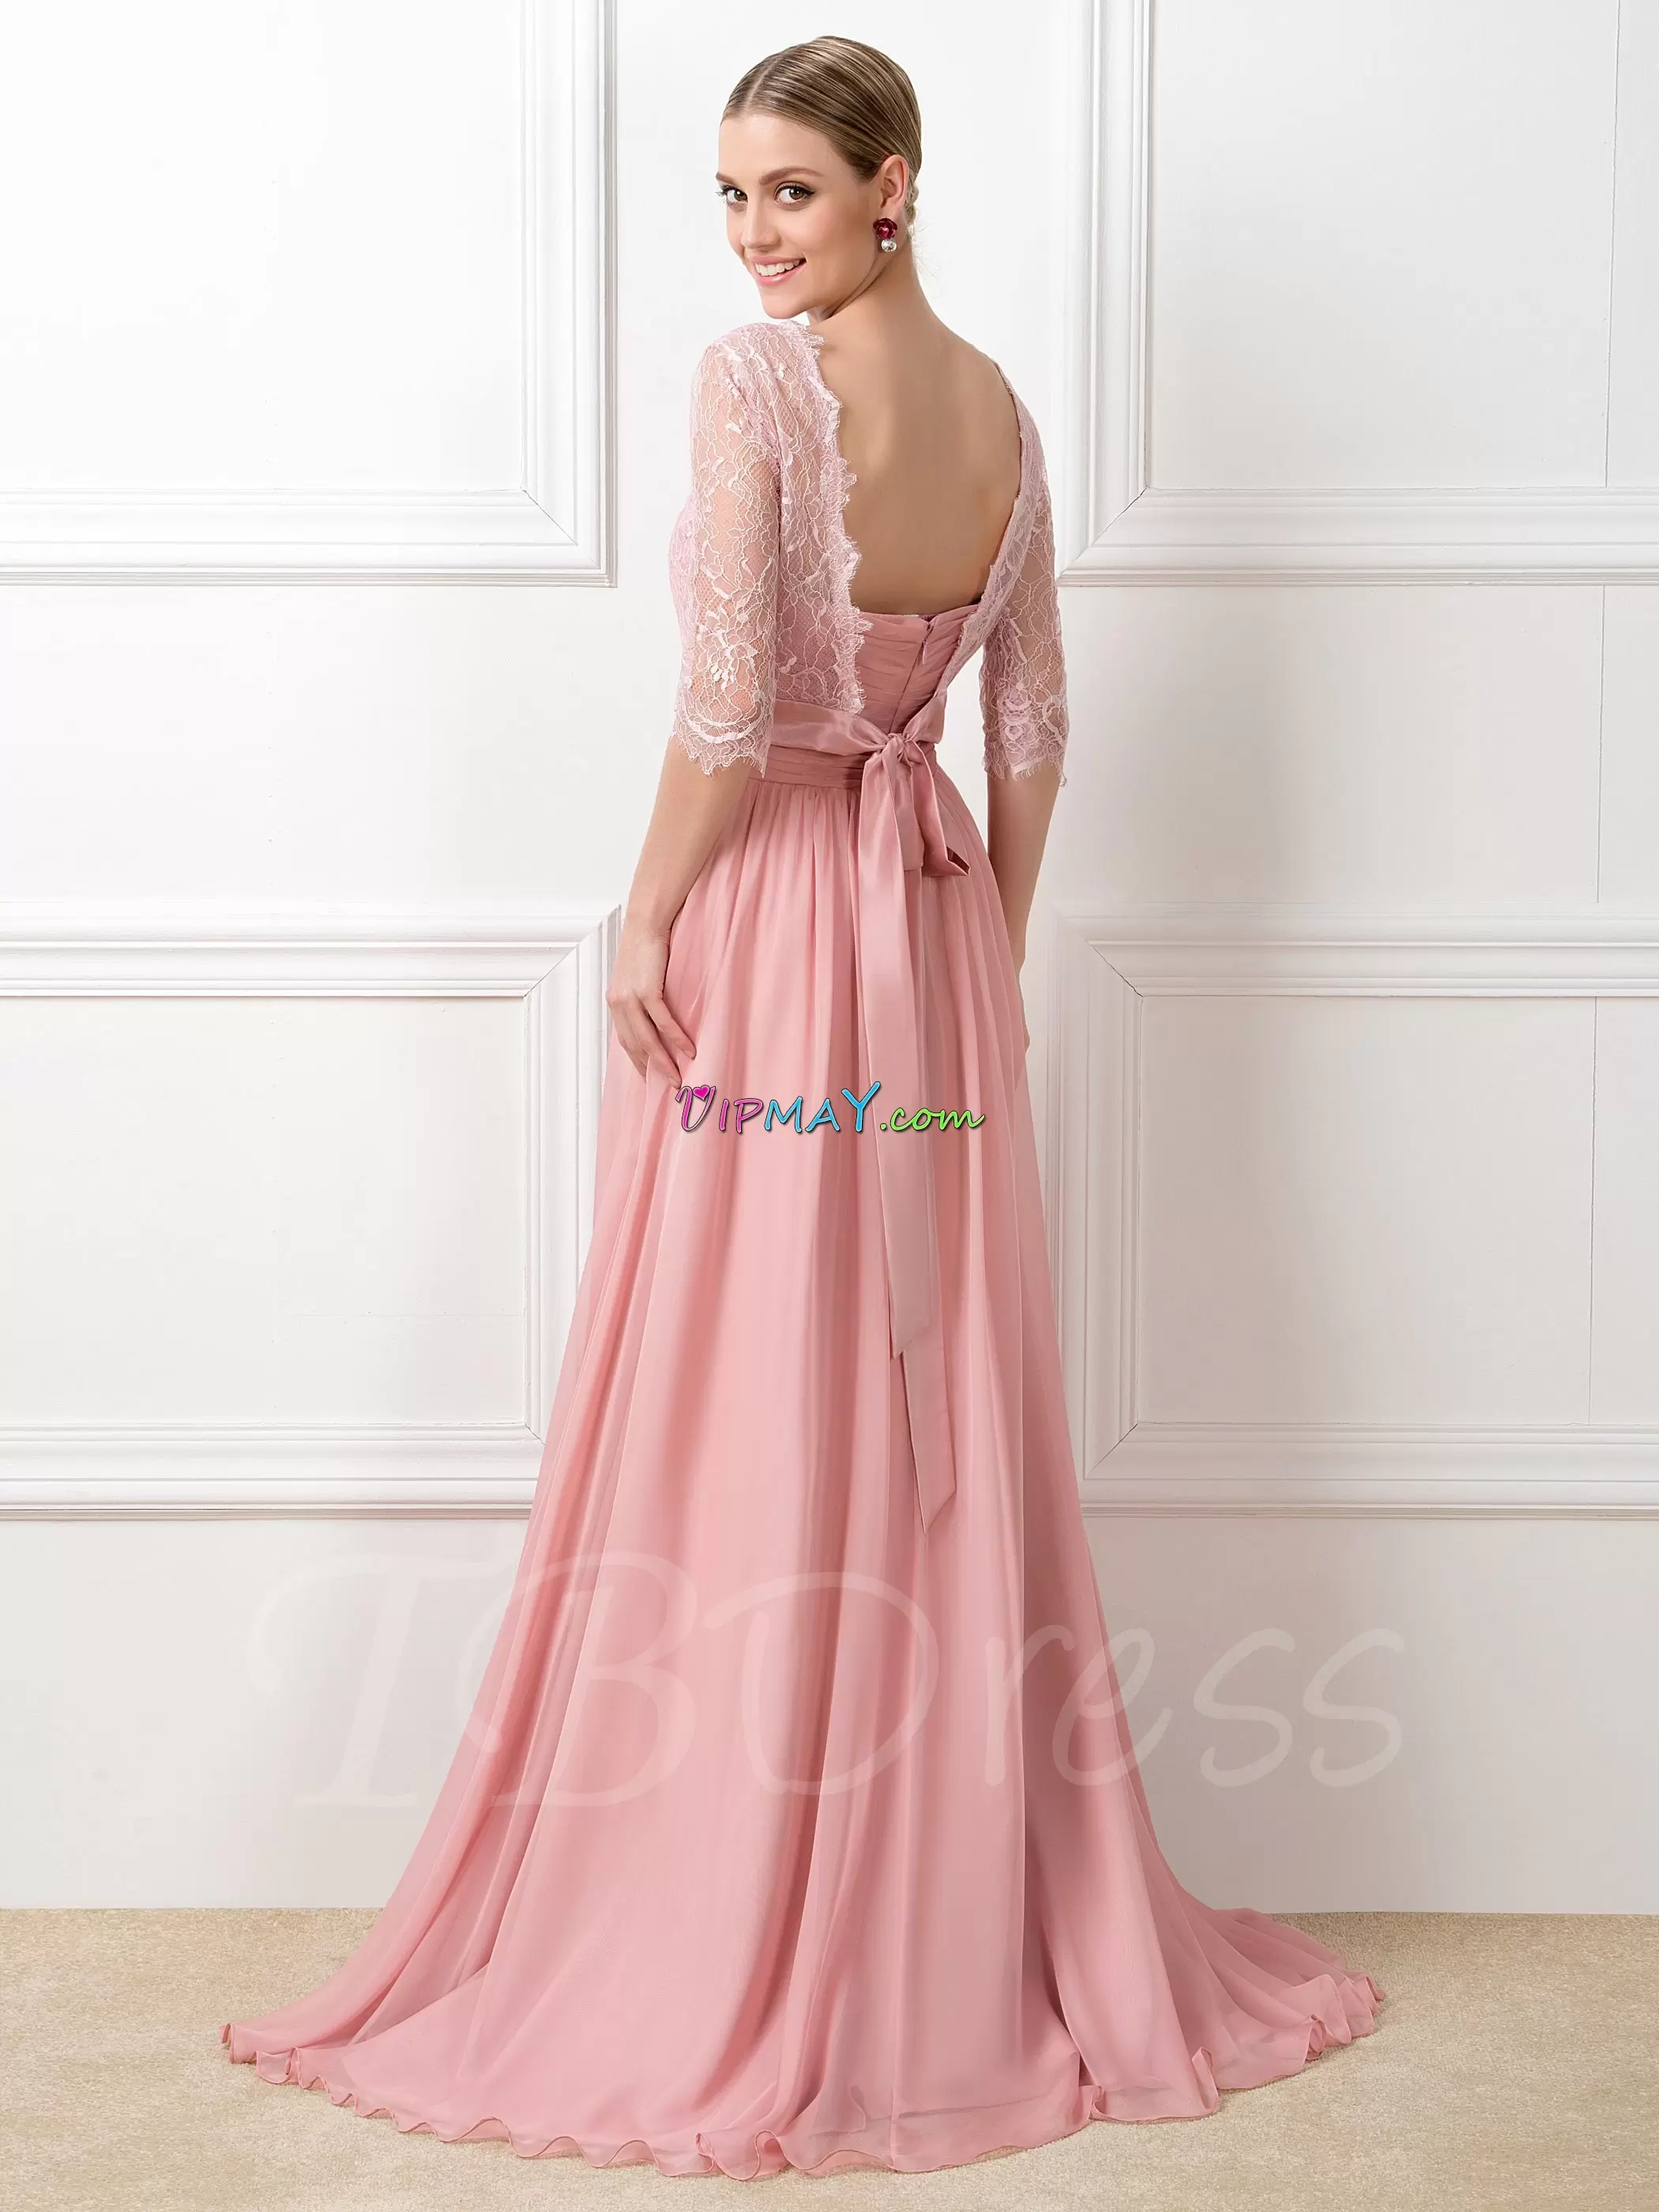 Adorable Scalloped Half Sleeves Homecoming Dress Brush Train Lace and Appliques Pink Chiffon